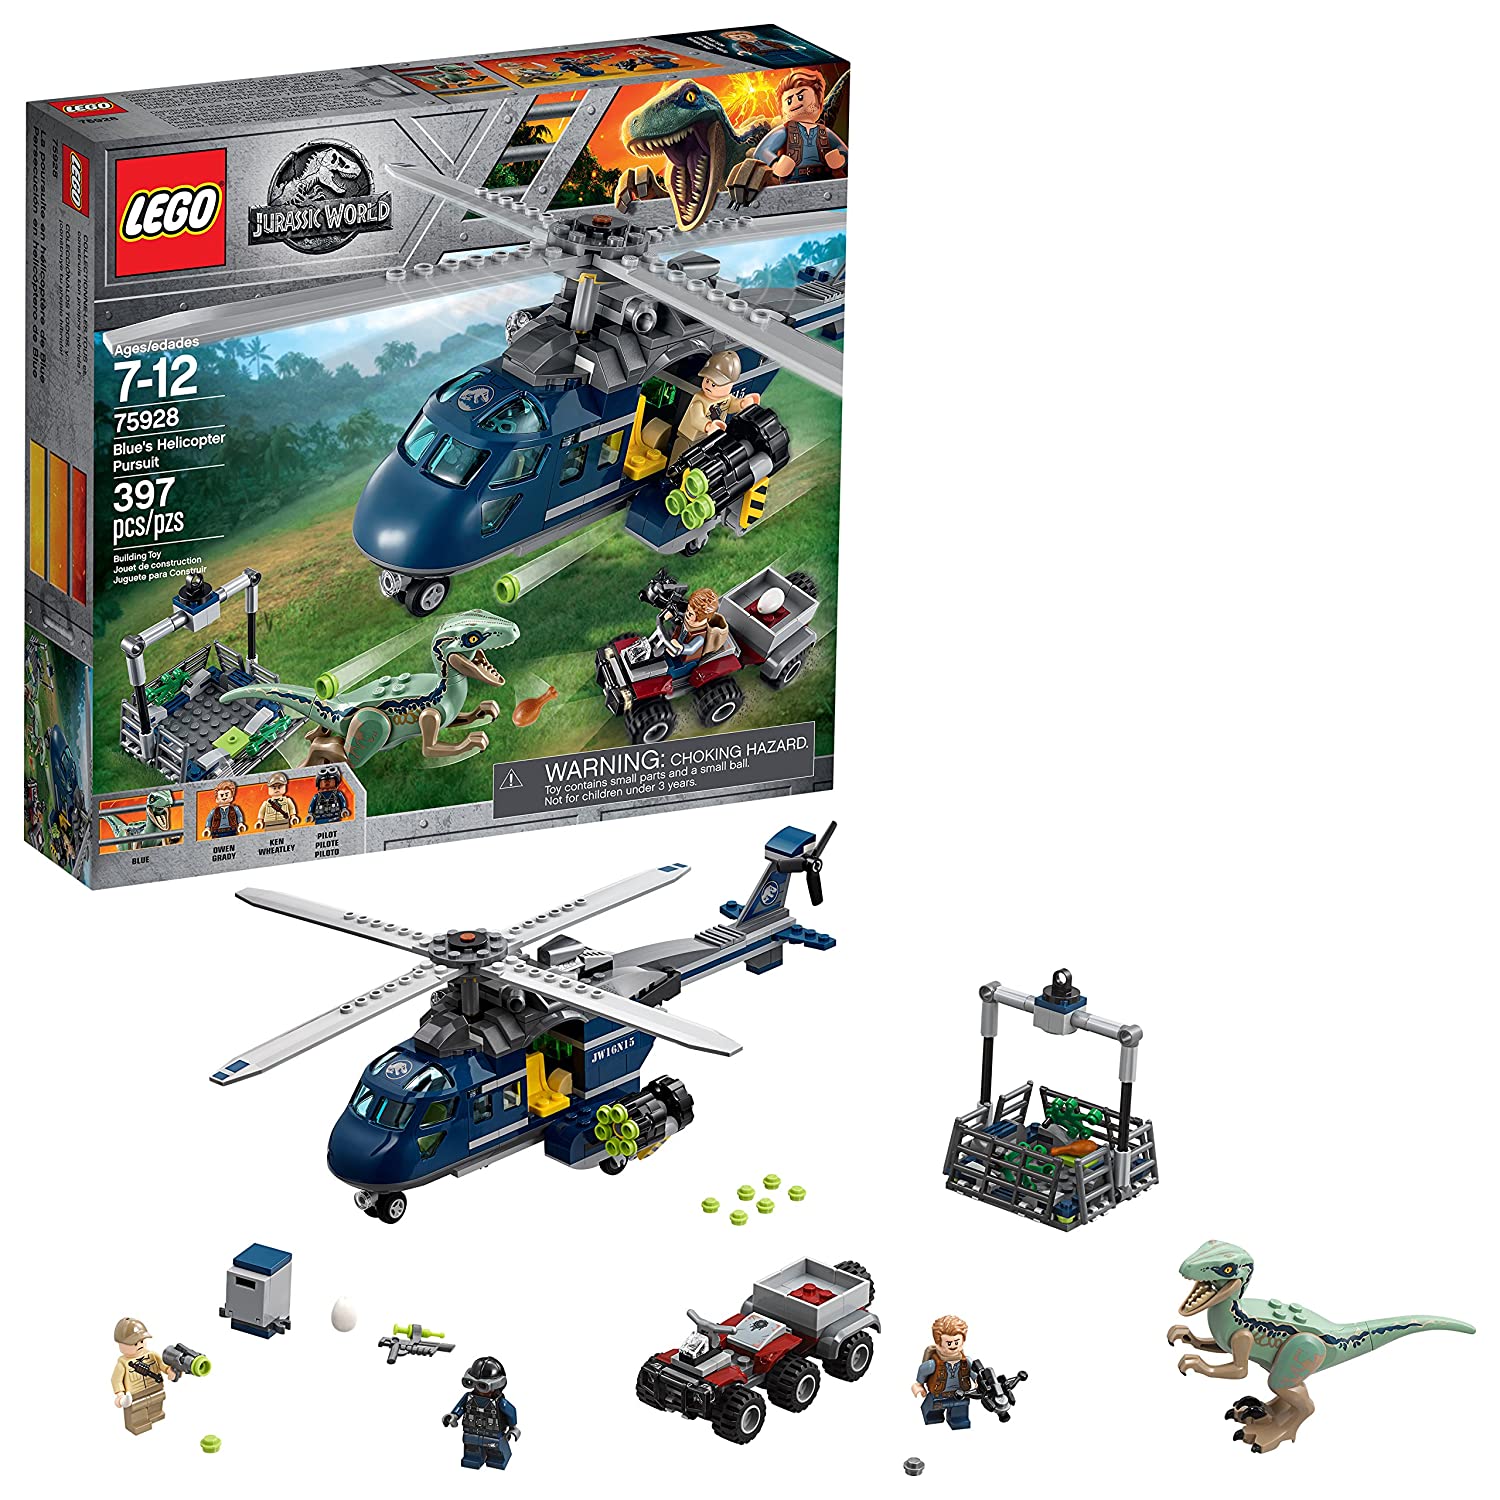 Top 9 Best Lego Jurassic Park Sets Reviews in 2023 6